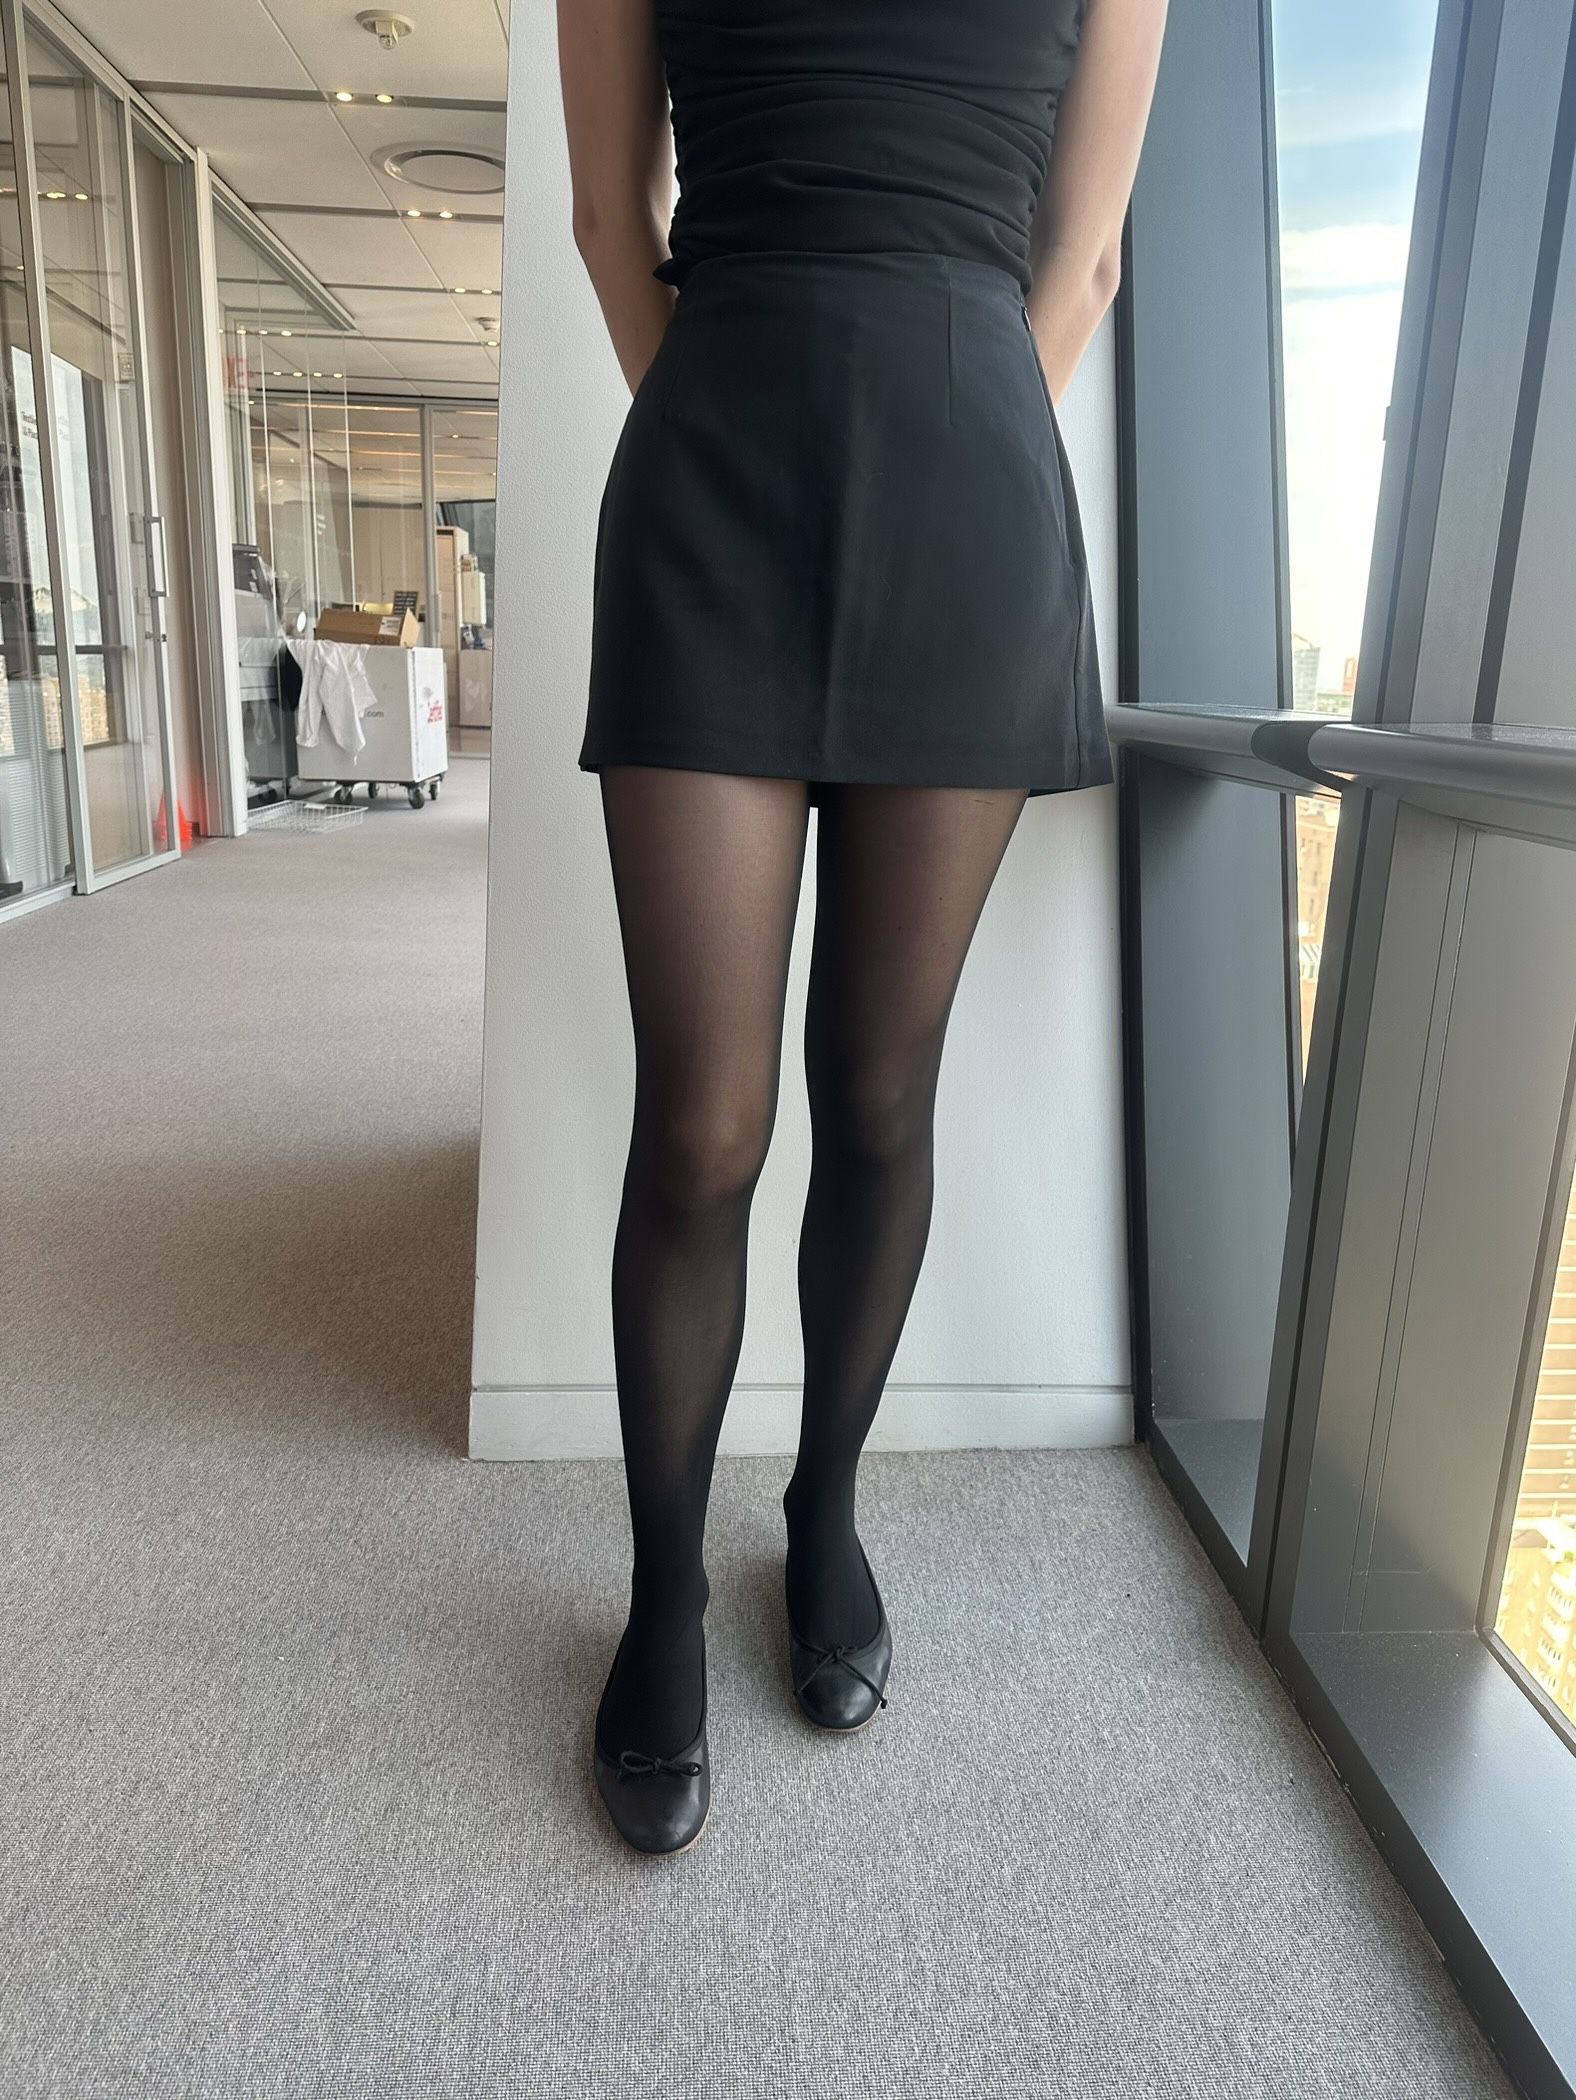 Any other tights recommendations? #sheertex #review #clothingreview